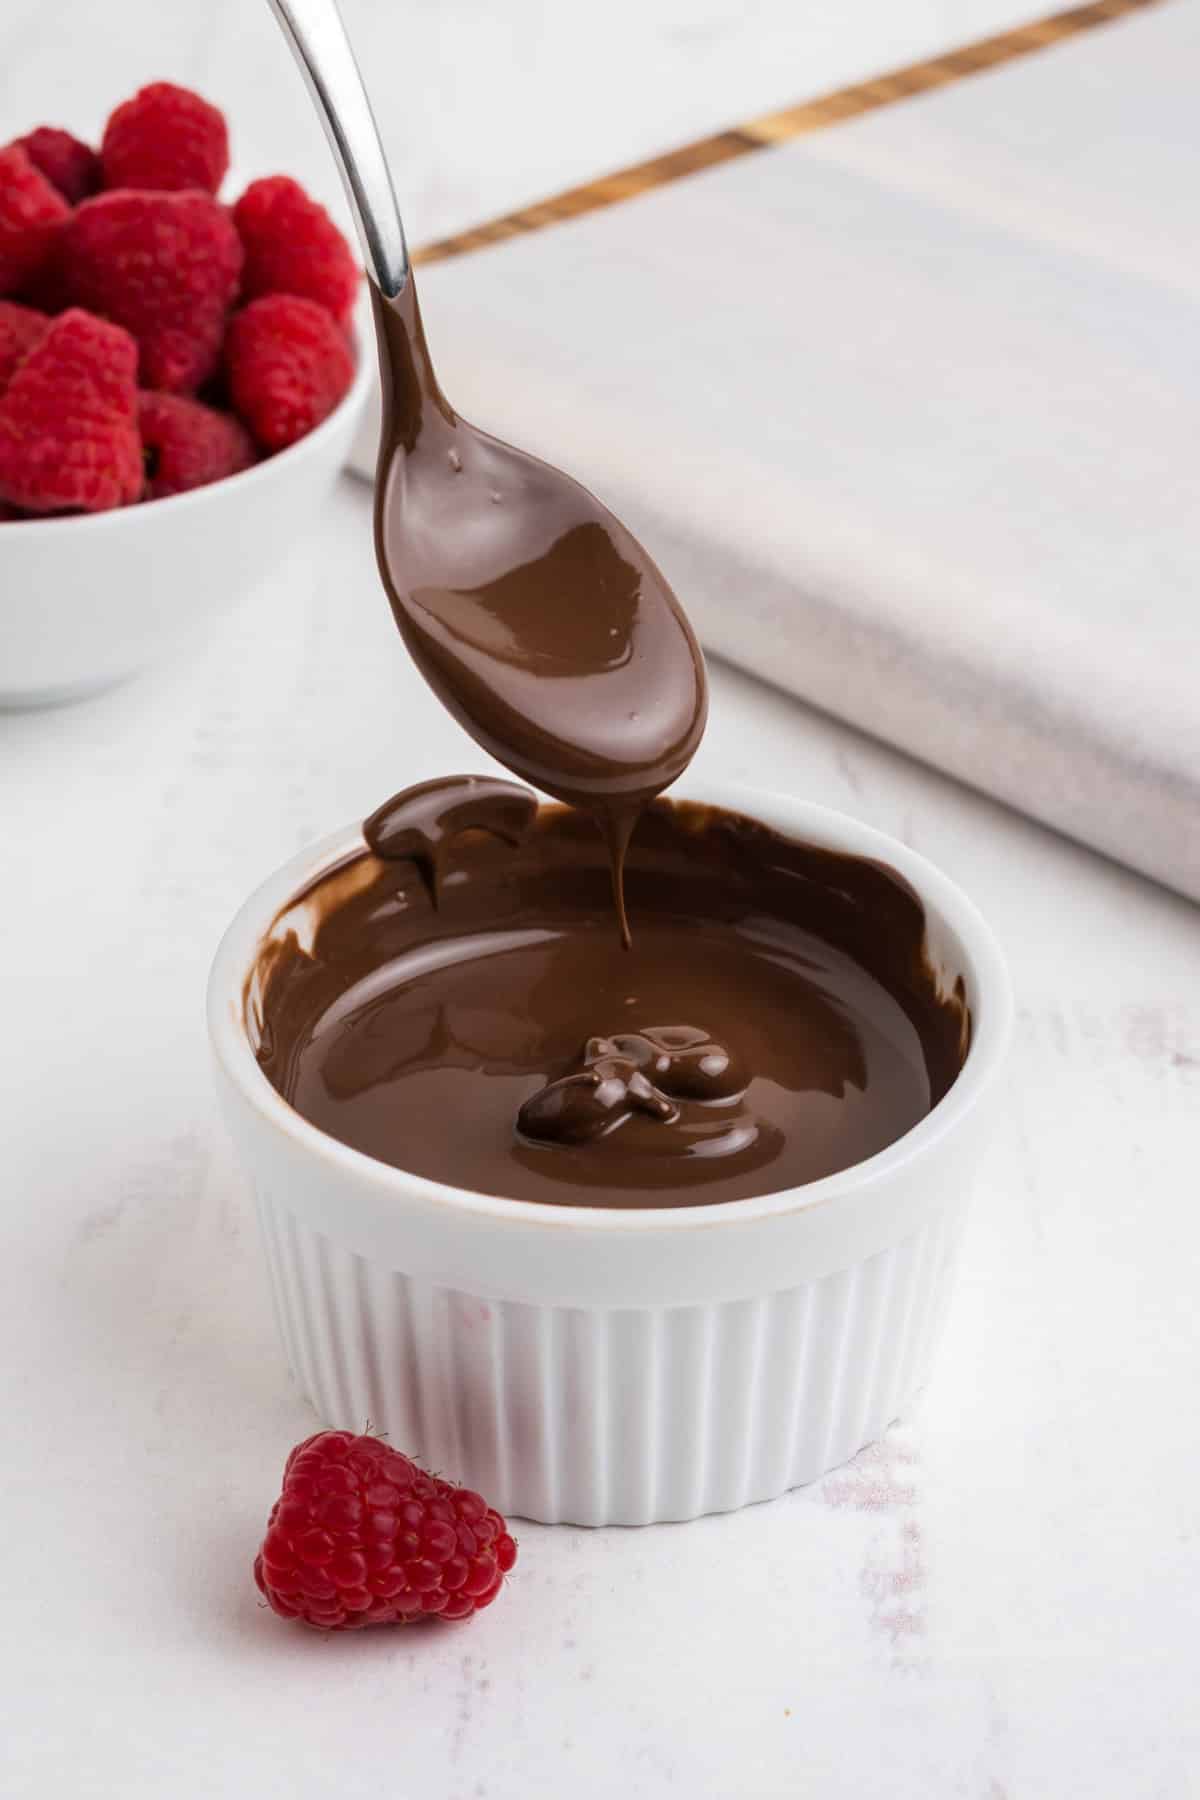 Melted chocolate in a bowl with a spoon lifting some out to drip back into it.